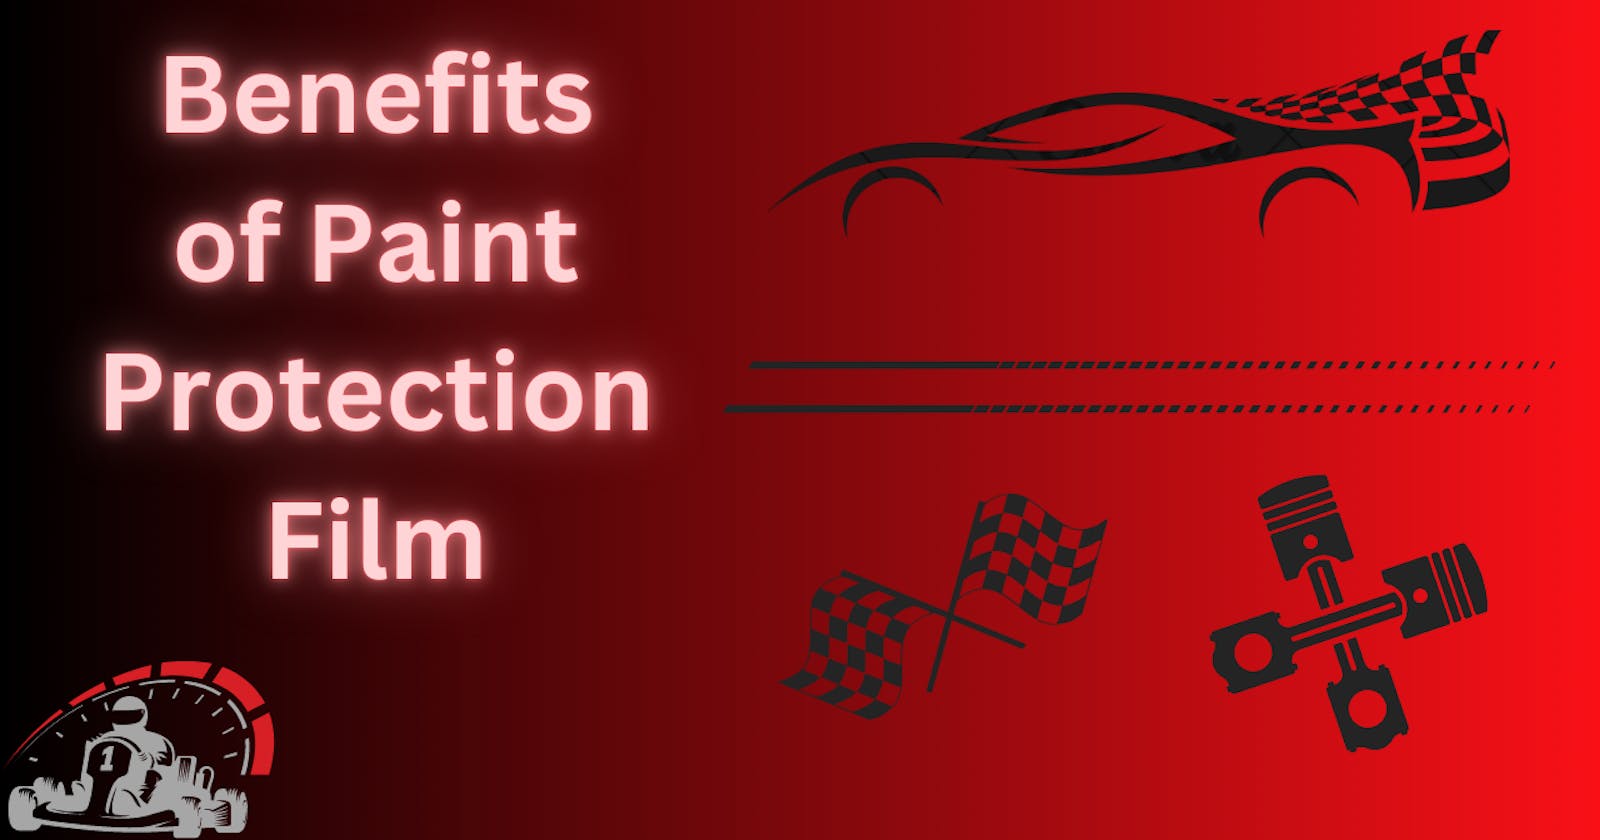 Benefits of Paint Protection Film